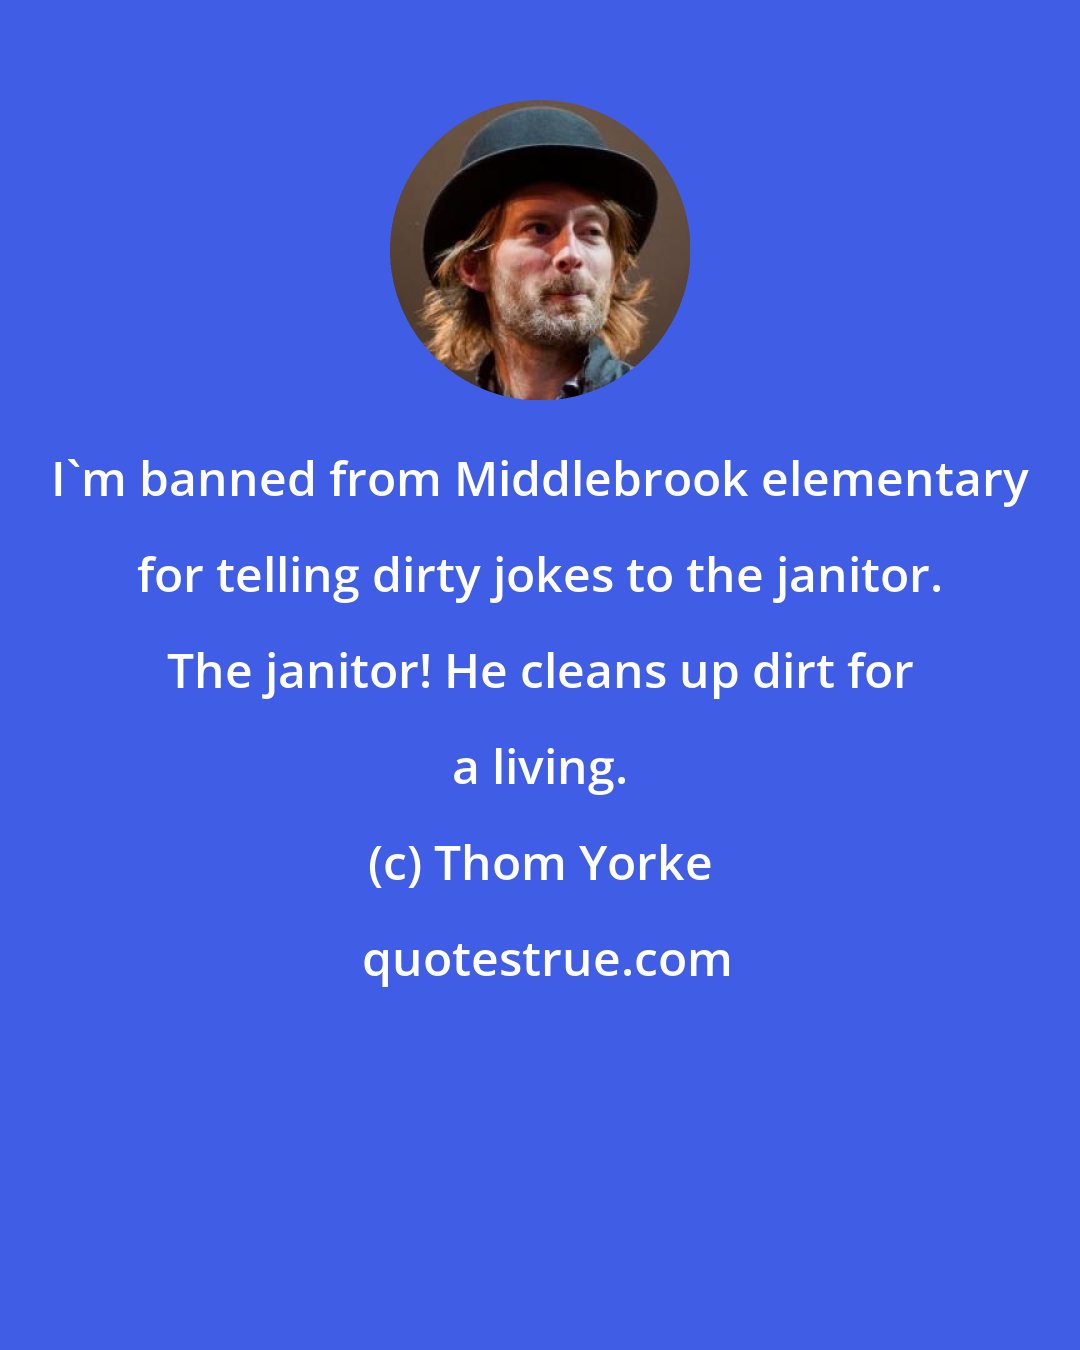 Thom Yorke: I'm banned from Middlebrook elementary for telling dirty jokes to the janitor. The janitor! He cleans up dirt for a living.